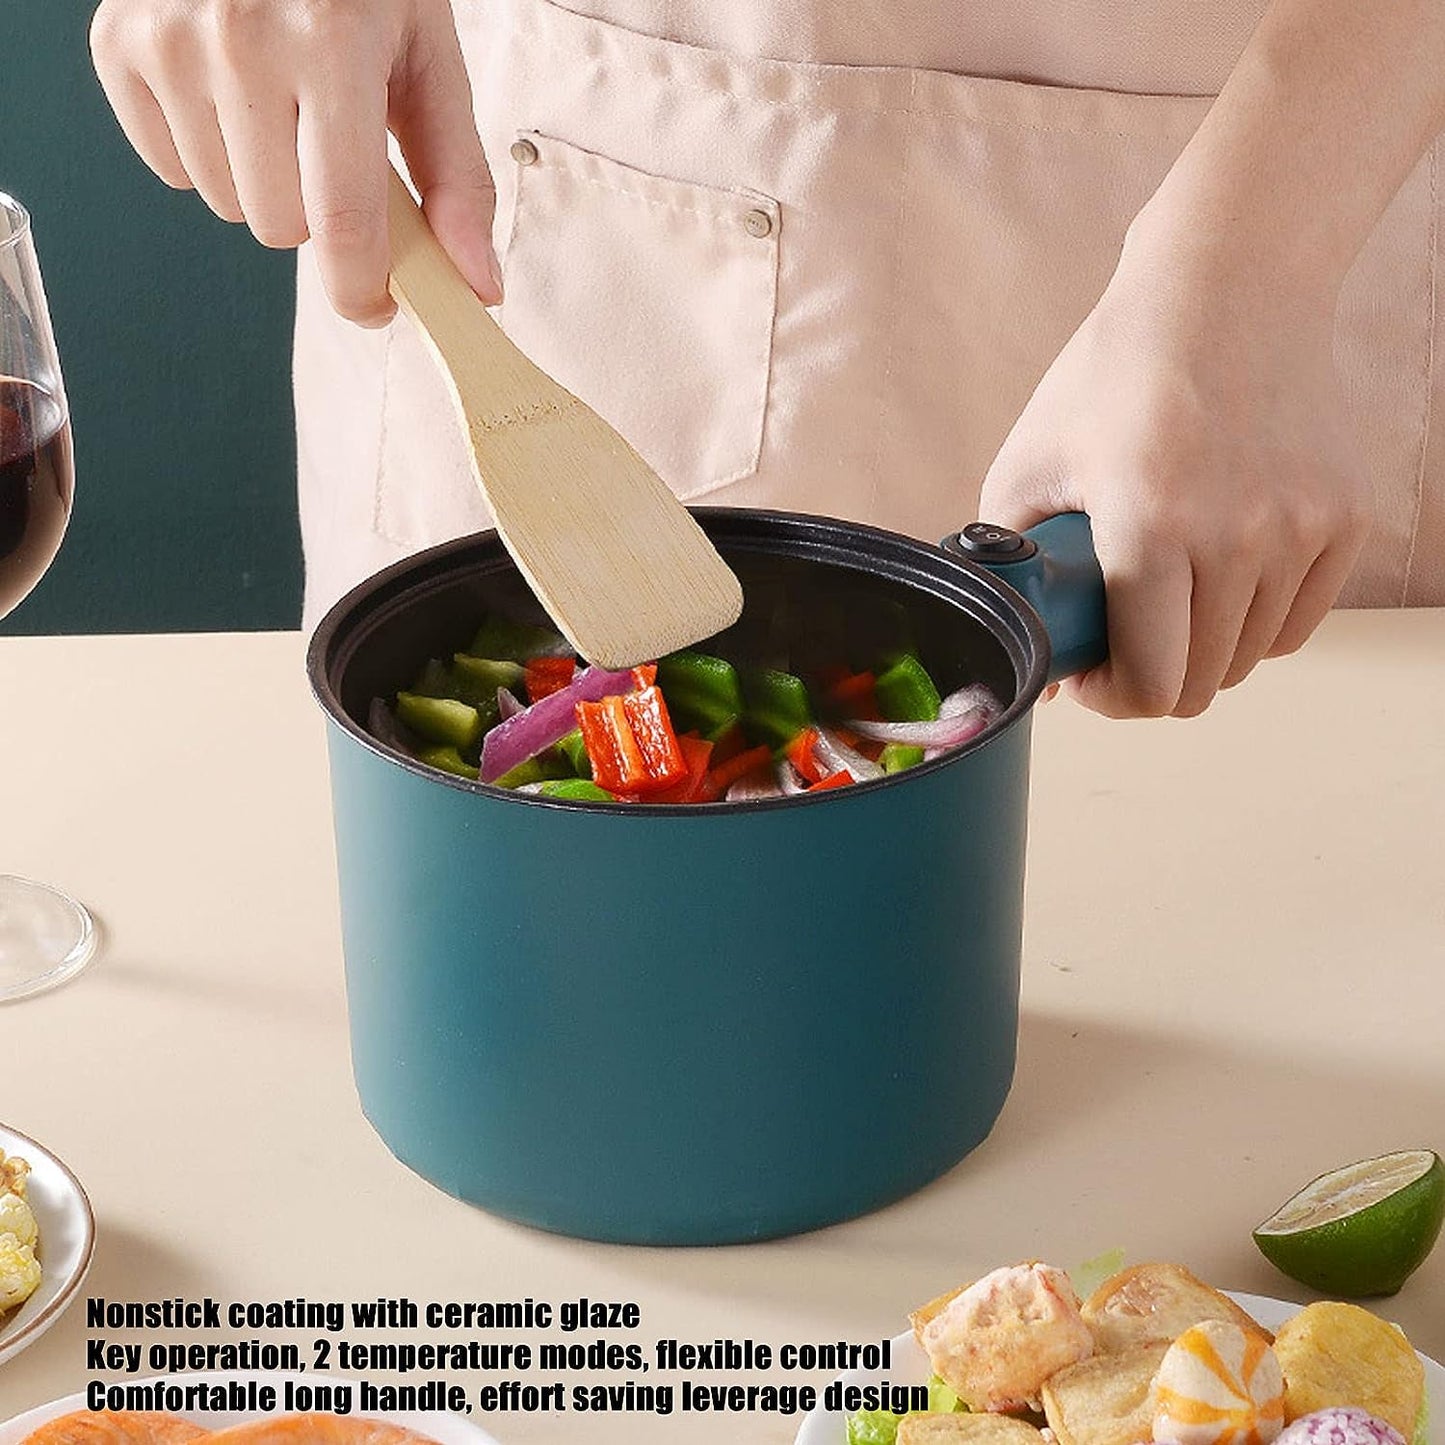 Portable Electric Hot Pot Cooker with 1.8 L Capacity - Ideal for Dorms, Offices, and On-the-Go Cooking